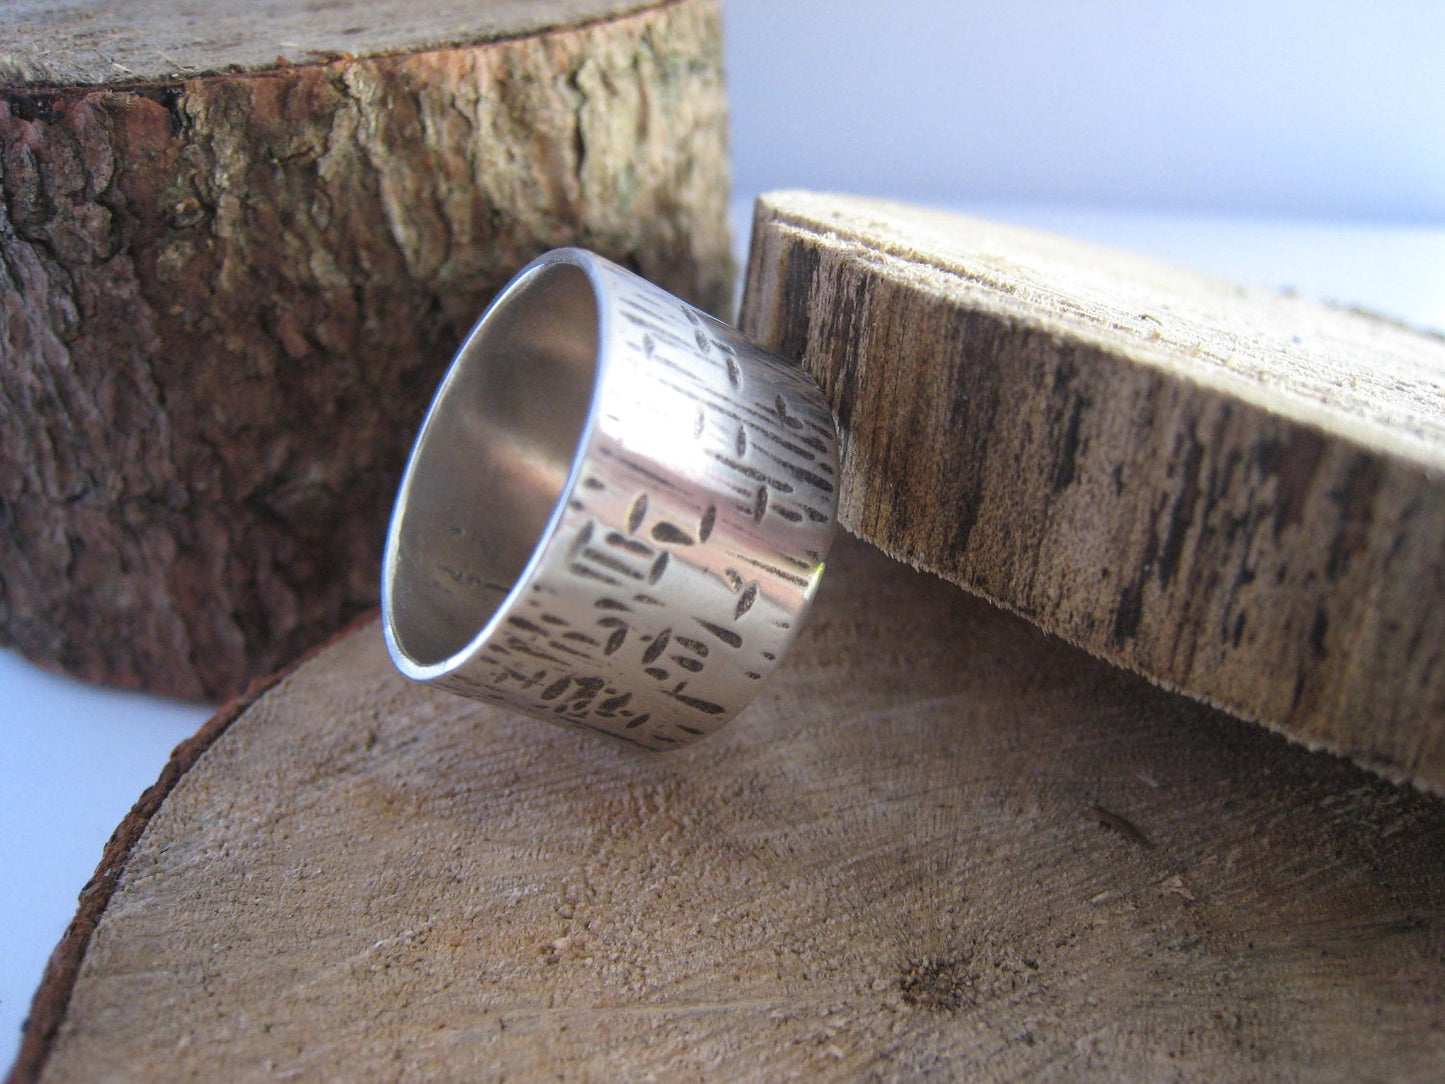 Crosshatch Textured Silver Band